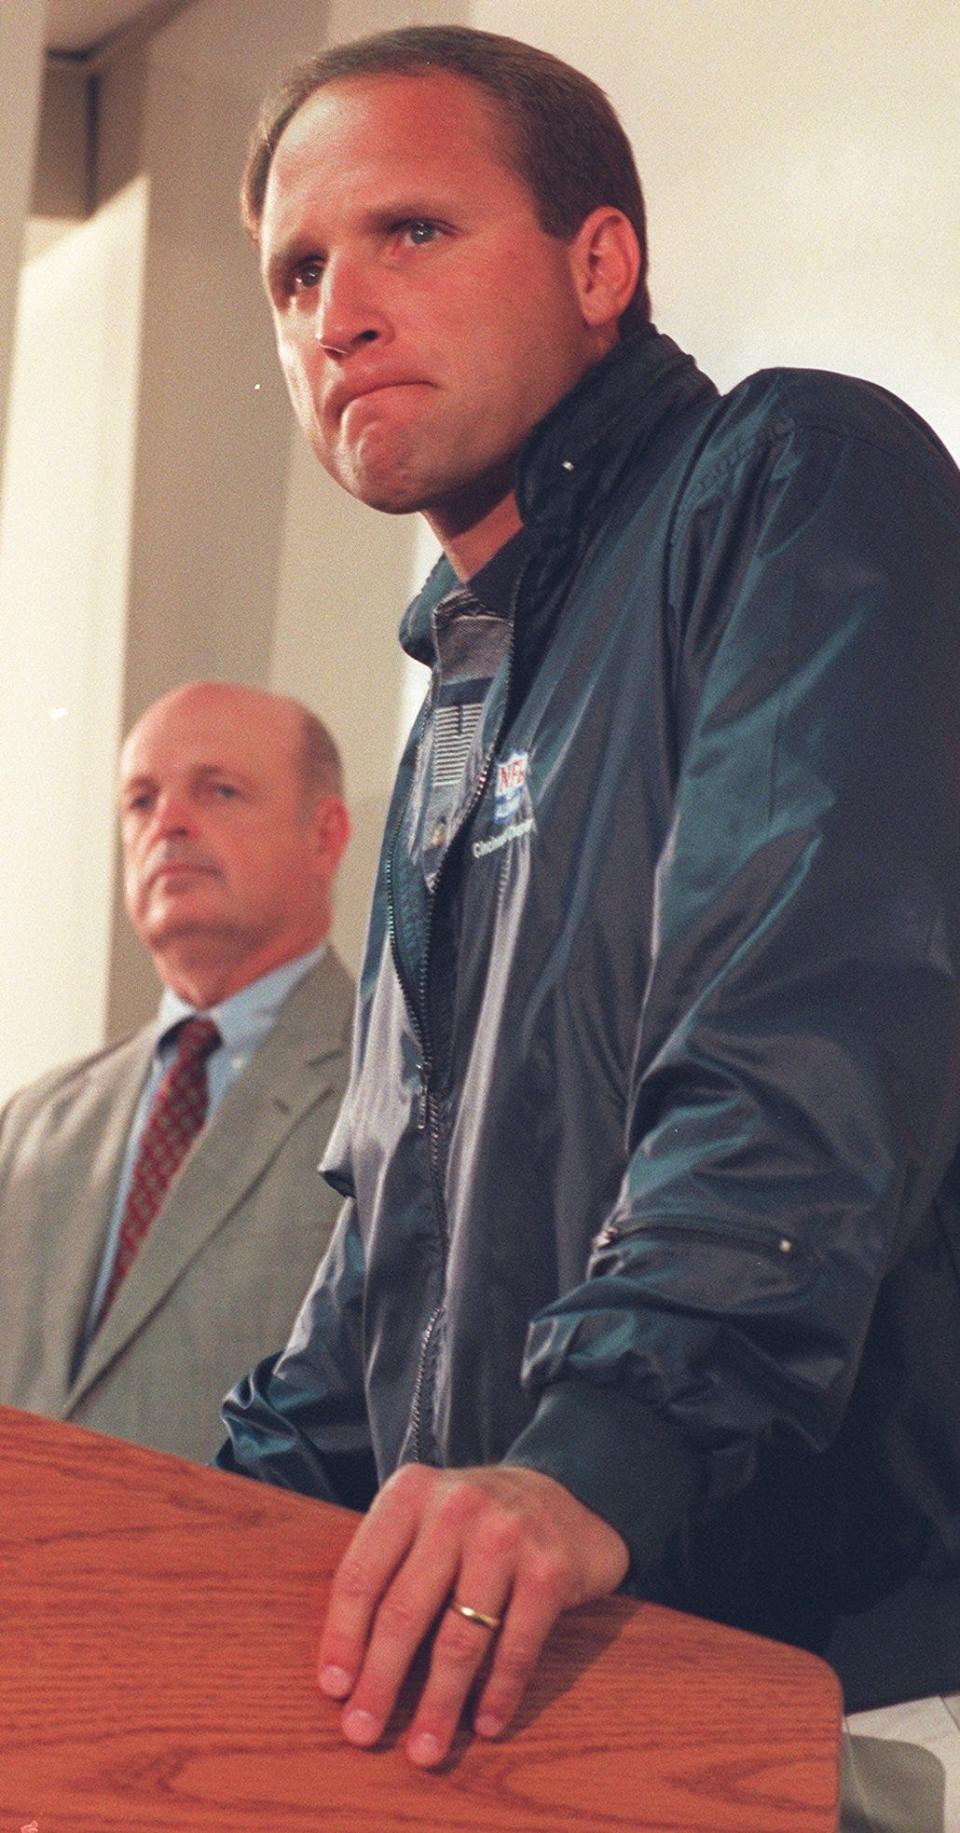 October 21, 1996. Cincinnati Bengals President and General Manager Mike Brown addresses the media during a press conference at Spinney Field Monday where Brown, left, announced that Head Coach Dave Shula, right, was stepping down as coach and is being replaced by offensive coordinator and former New York Jets head coach Bruce Coslet.